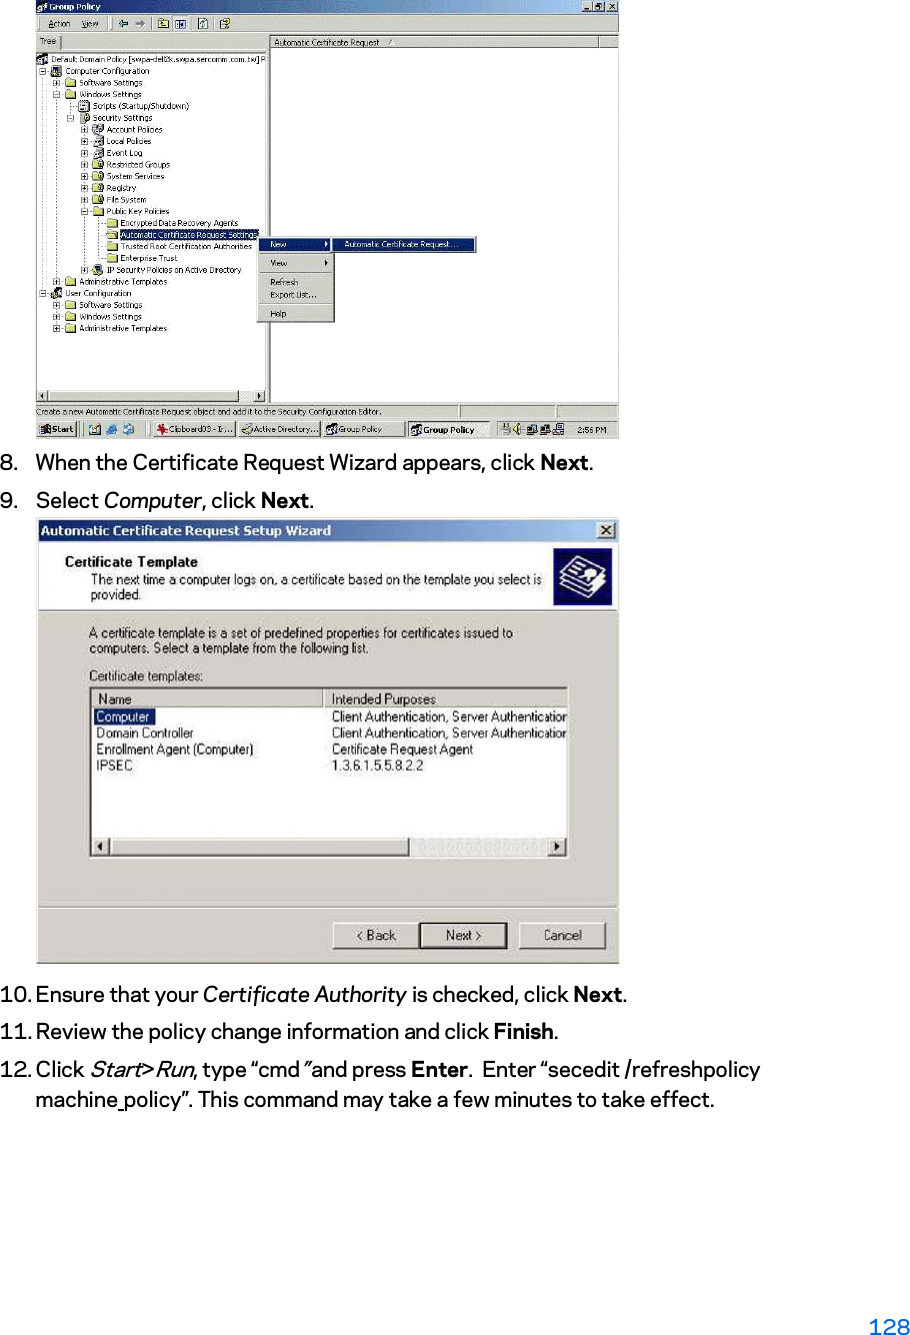 8. When the Certificate Request Wizard appears, click Next.  9. Select Computer, click Next. 10. Ensure that your Certificate Authority is checked, click Next.  11. Review the policy change information and click Finish.  12. Click Start&gt;Run, type “cmd” and press Enter.  Enter “secedit /refreshpolicy machine_policy”. This command may take a few minutes to take effect. 128